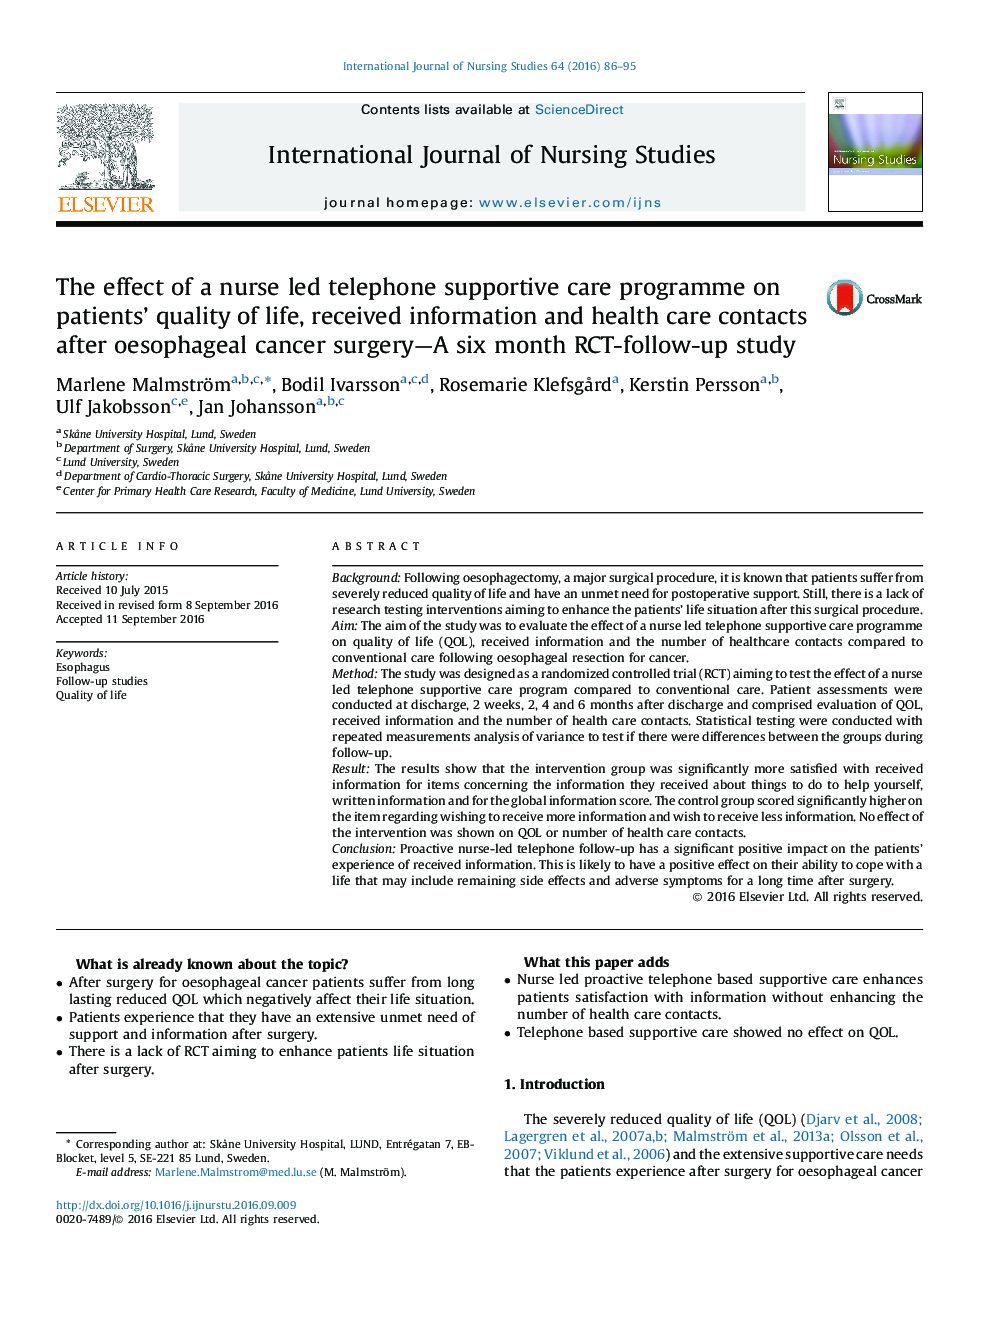 The effect of a nurse led telephone supportive care programme on patients' quality of life, received information and health care contacts after oesophageal cancer surgery-A six month RCT-follow-up study